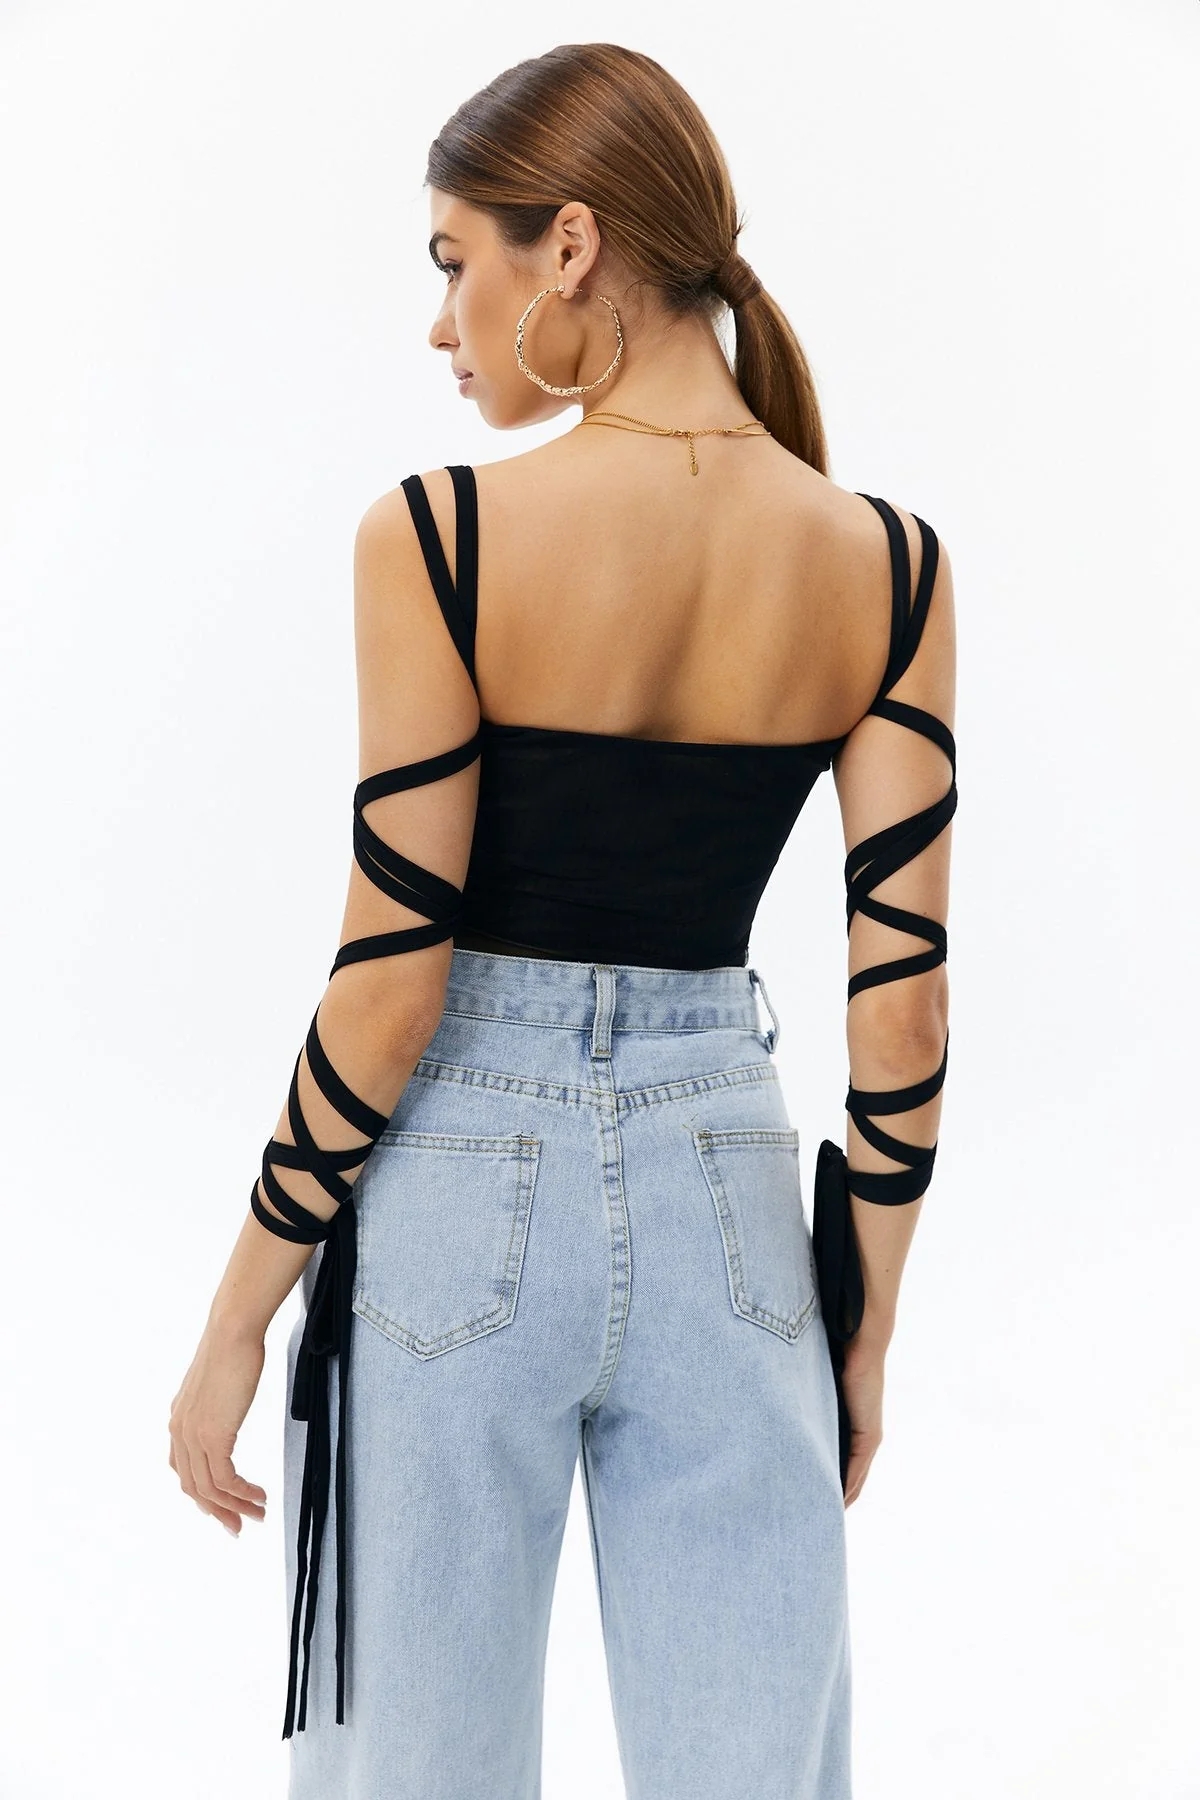 Solid Black Mesh Laced Arm Stretch Cami Crop Top